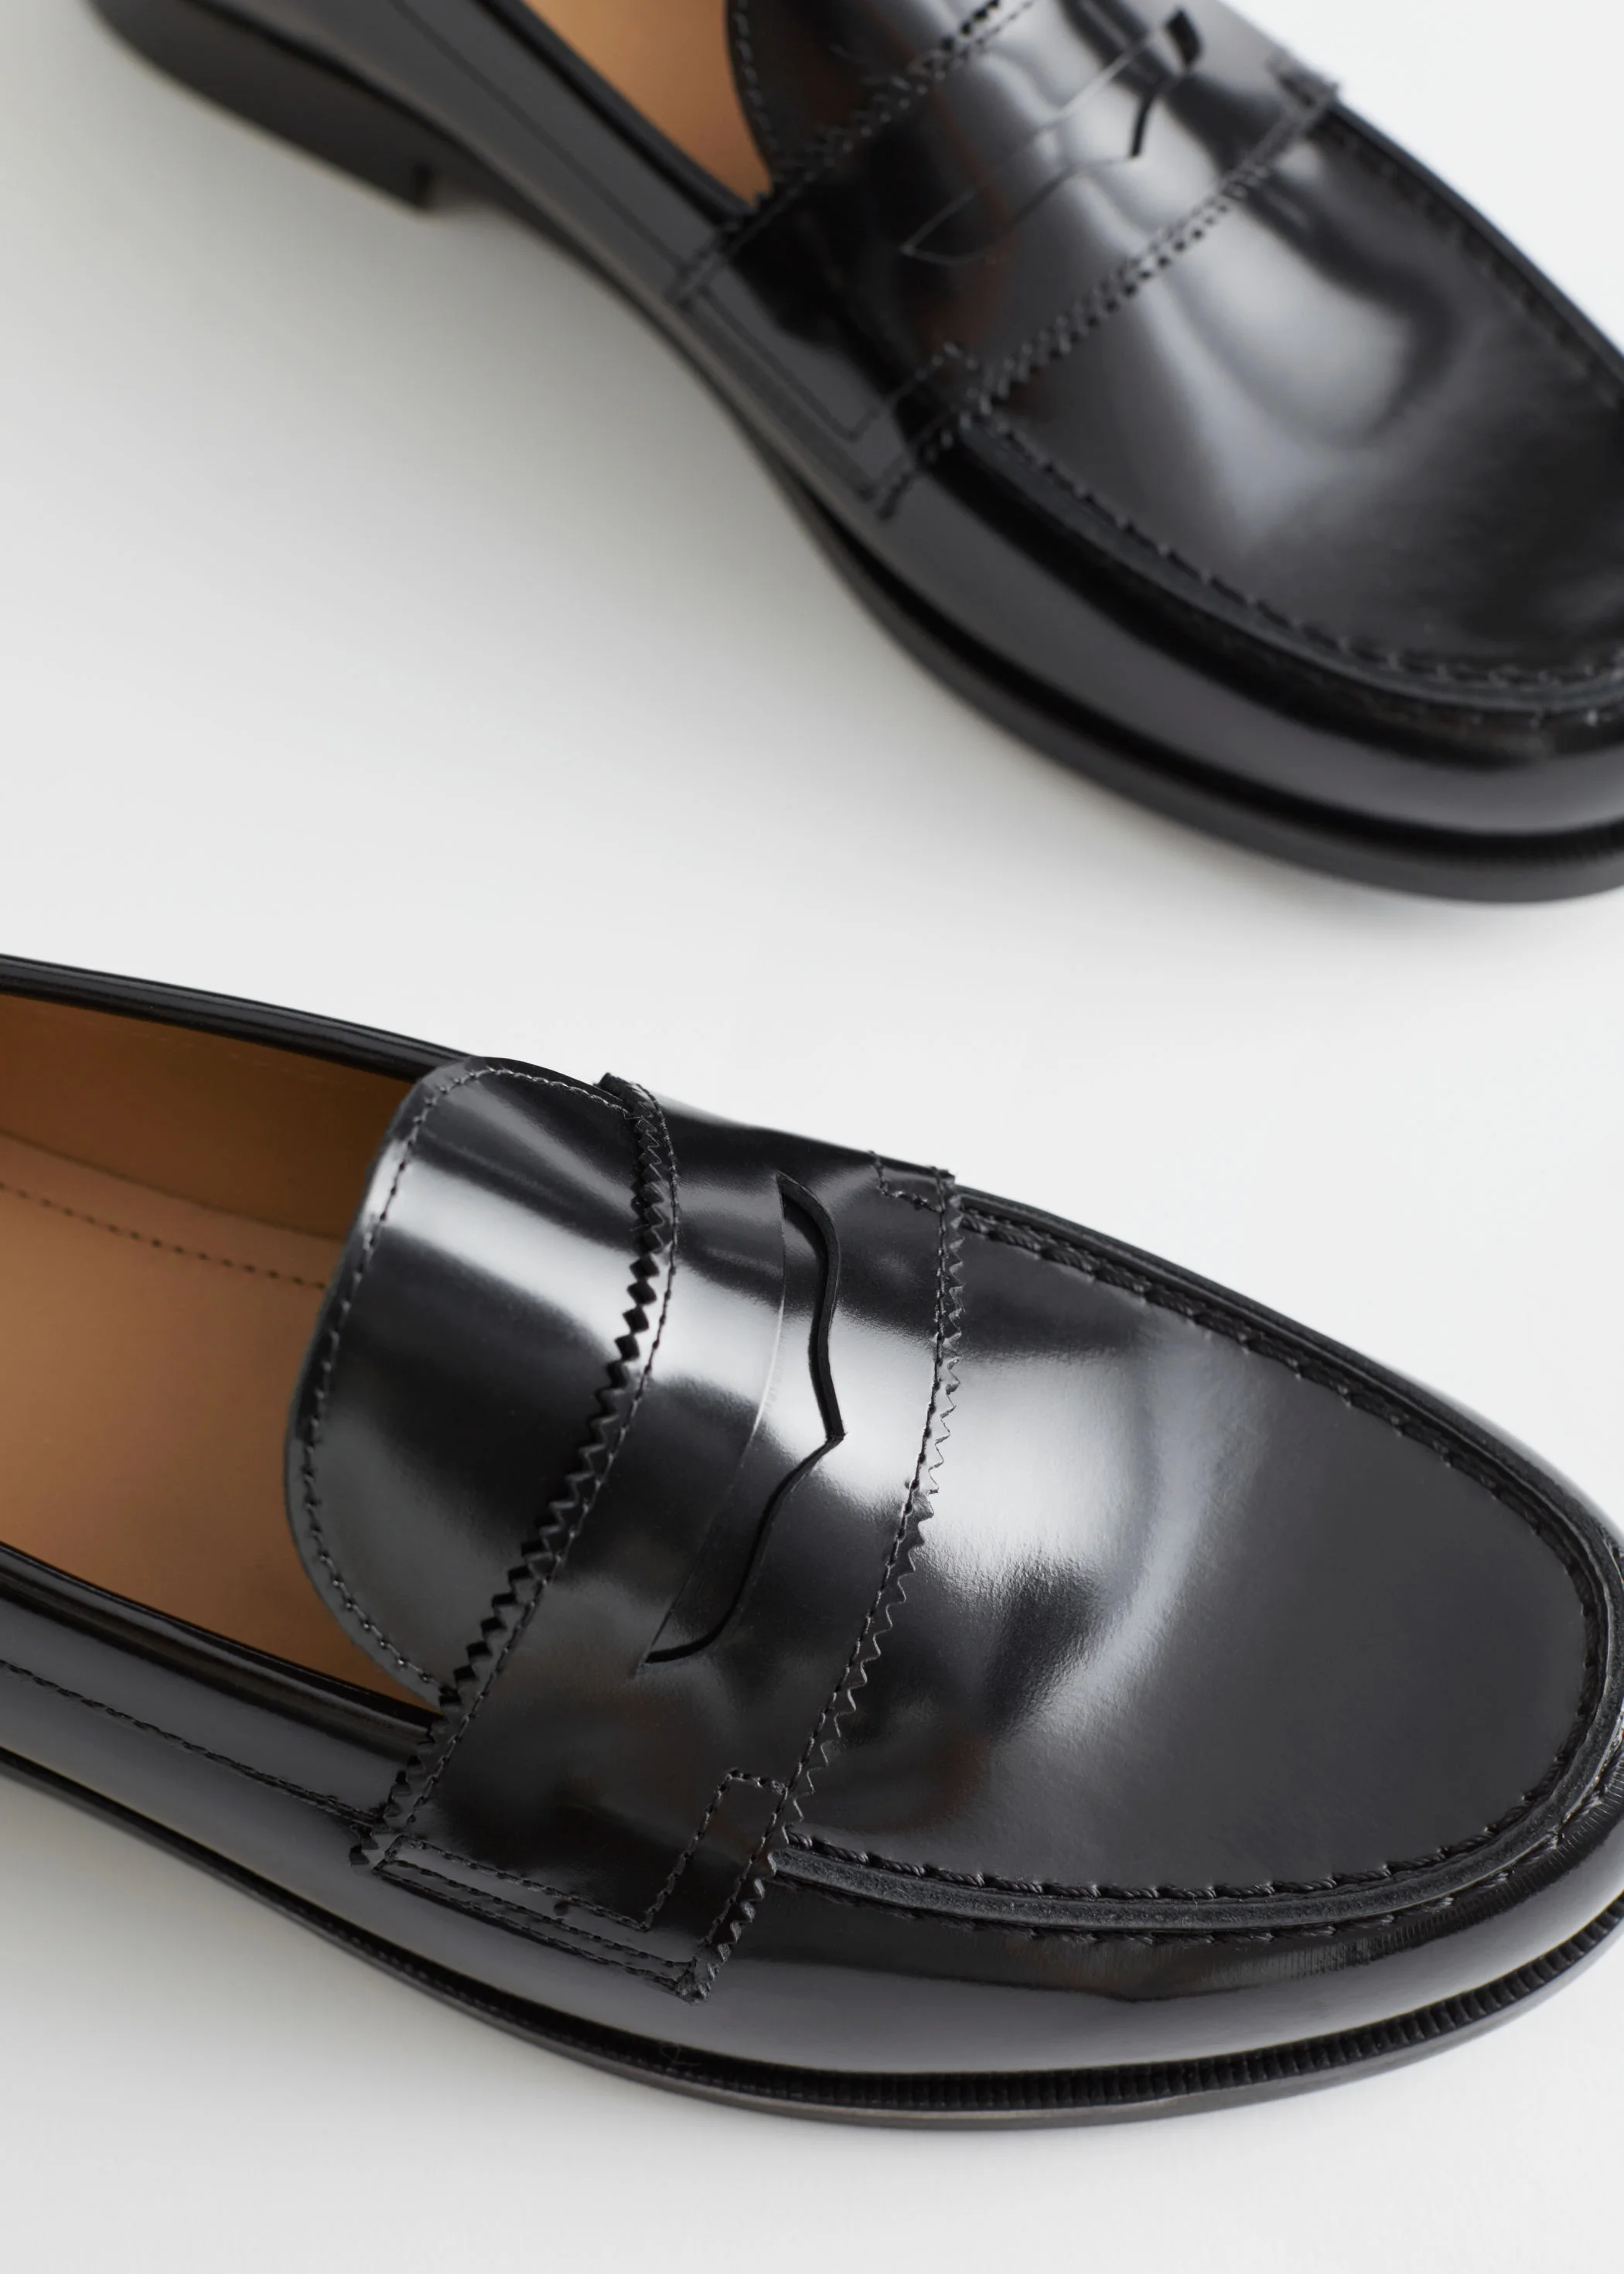 Other Stories Leather Penny Loafers